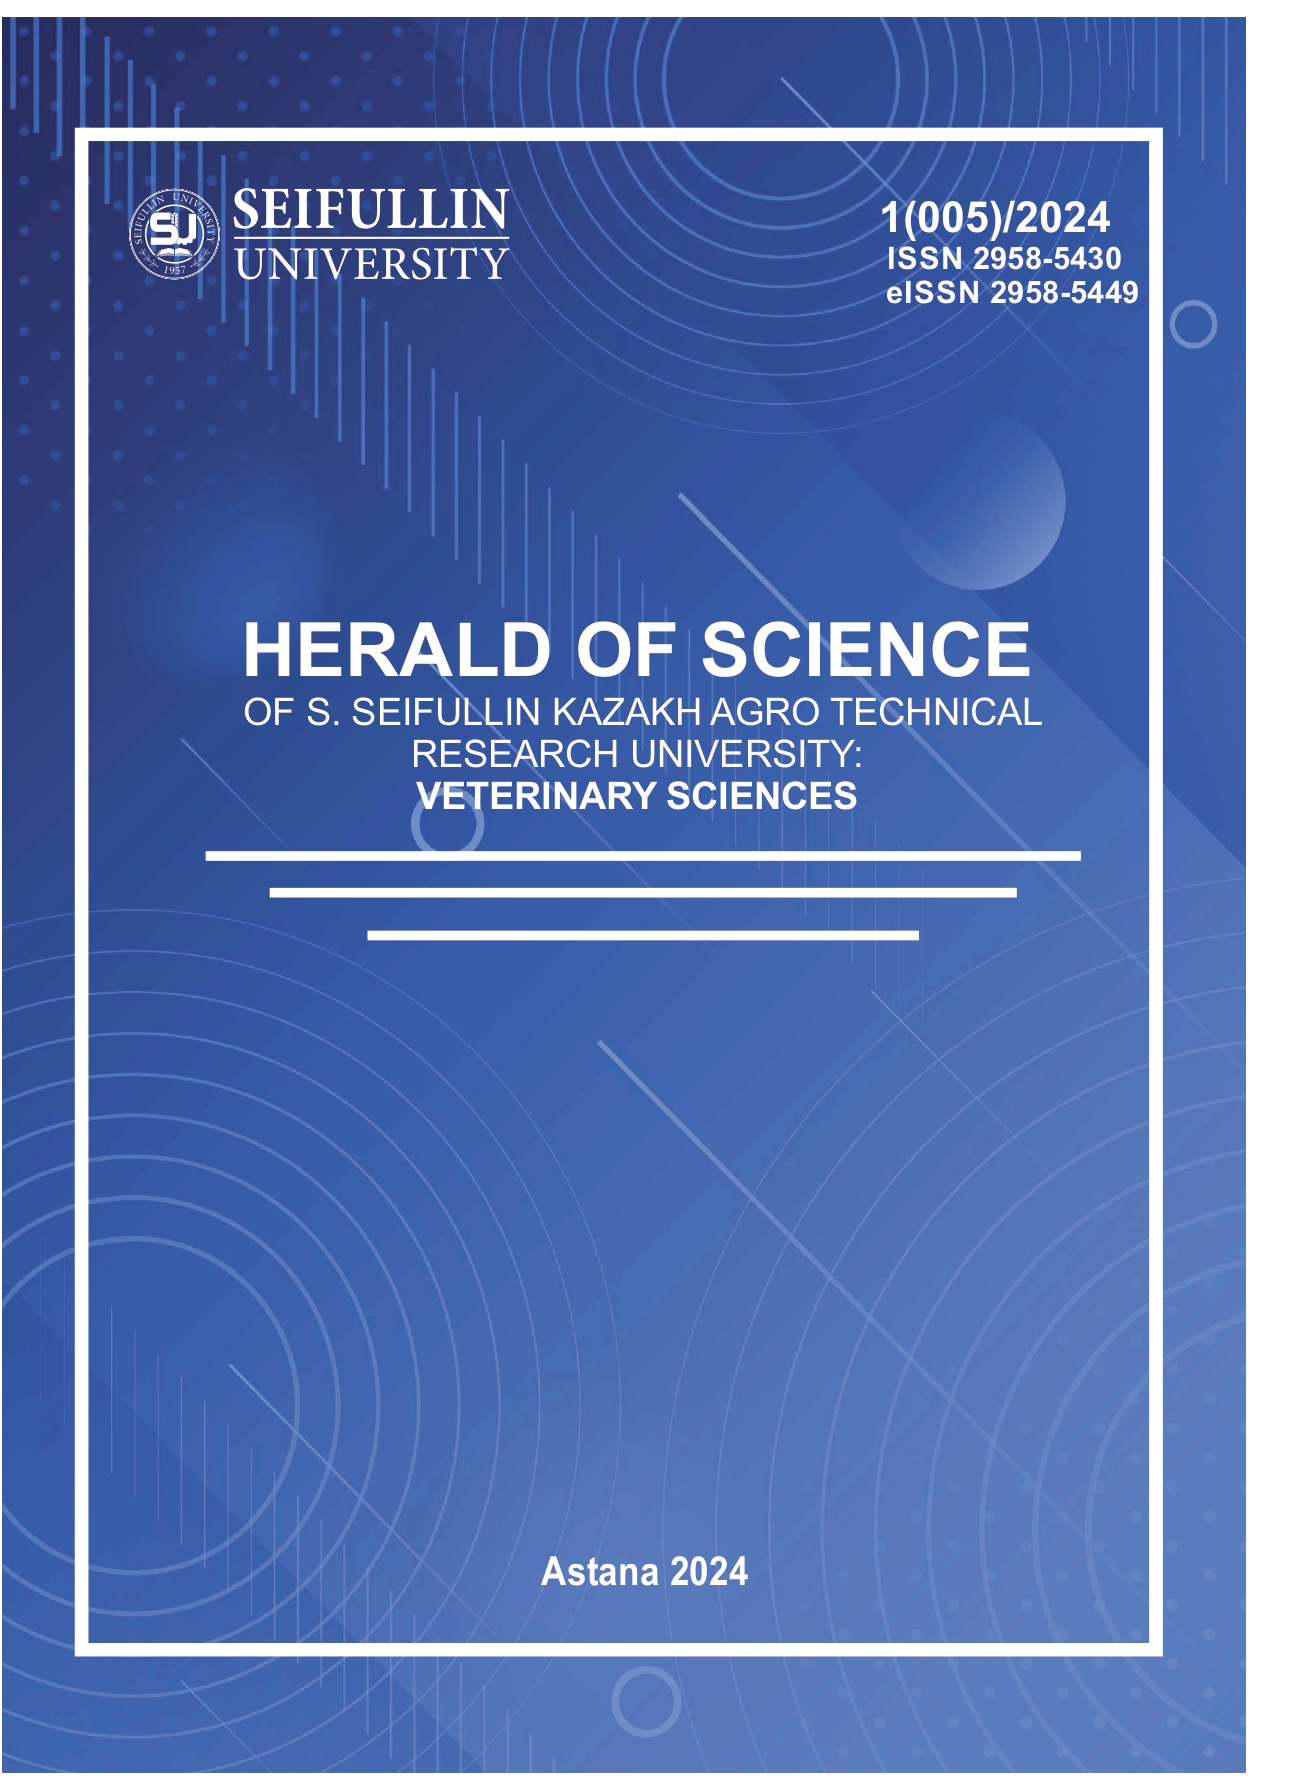 					View No. 1(005) (2024): HERALD OF SCIENCE OF S SEIFULLIN KAZAKH AGRO TECHNICAL RESEARCH UNIVERSITY
				